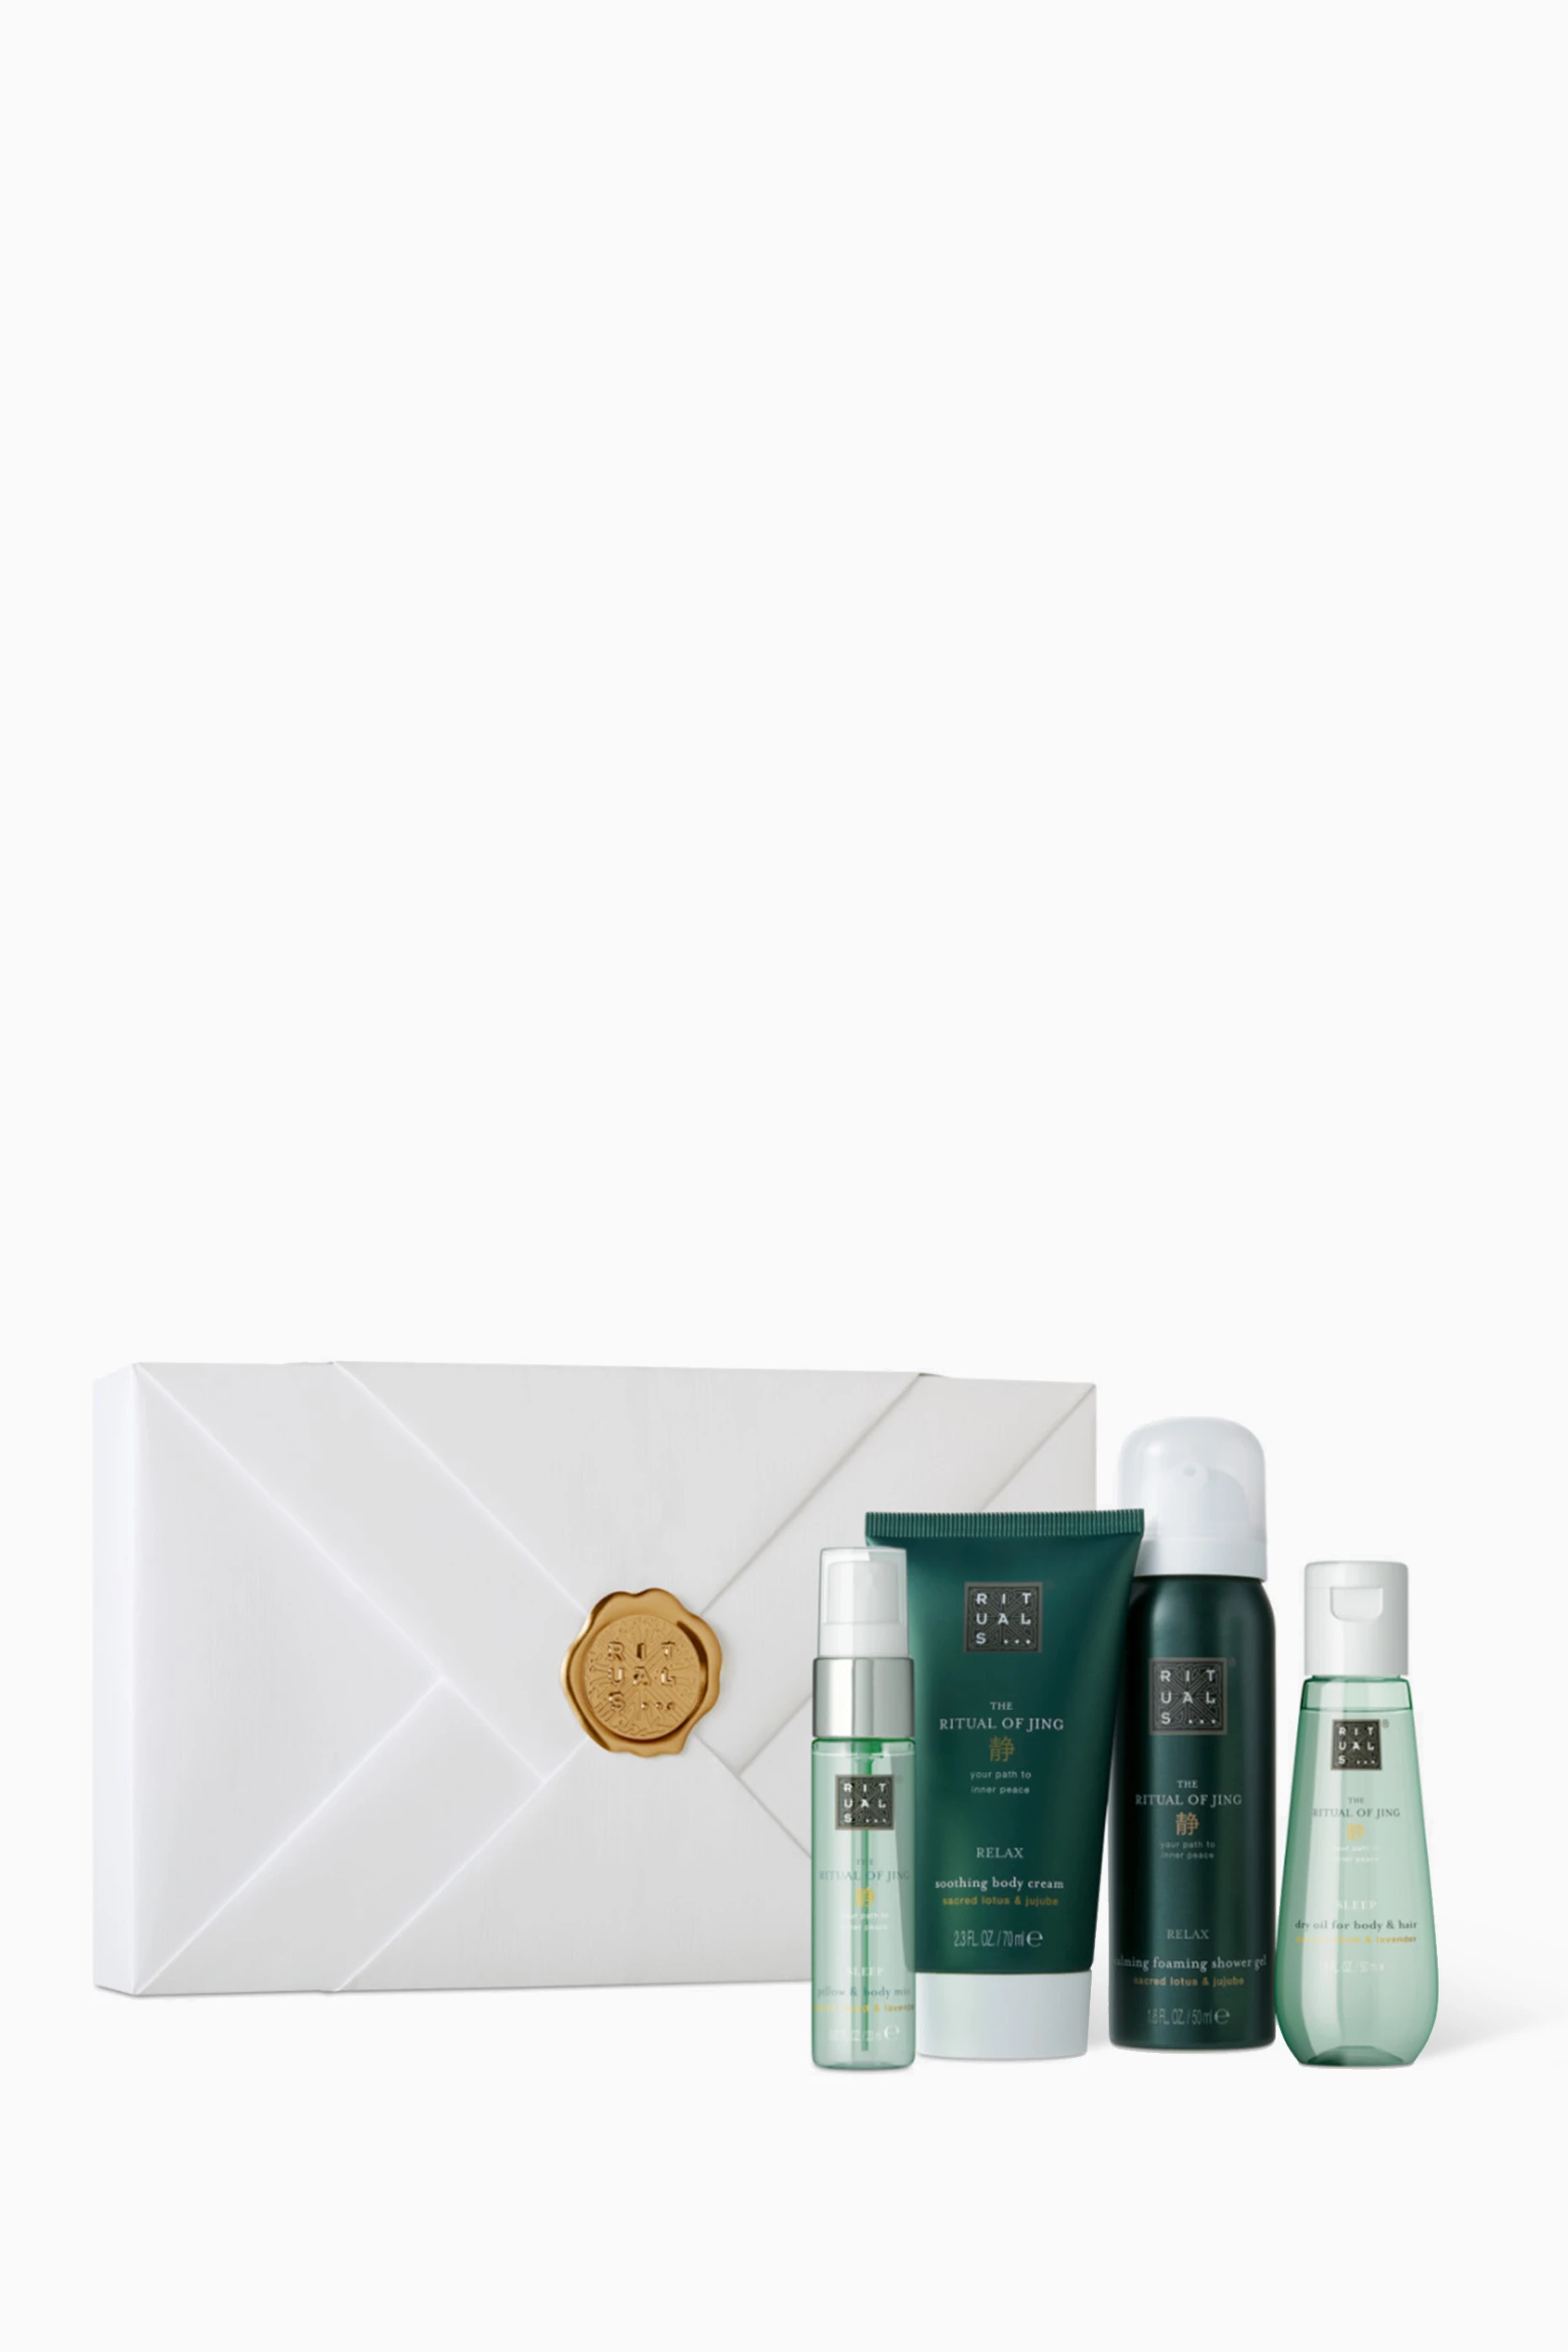 Buy Rituals Colourless Ritual of Jing Gift Set for UNISEX in UAE